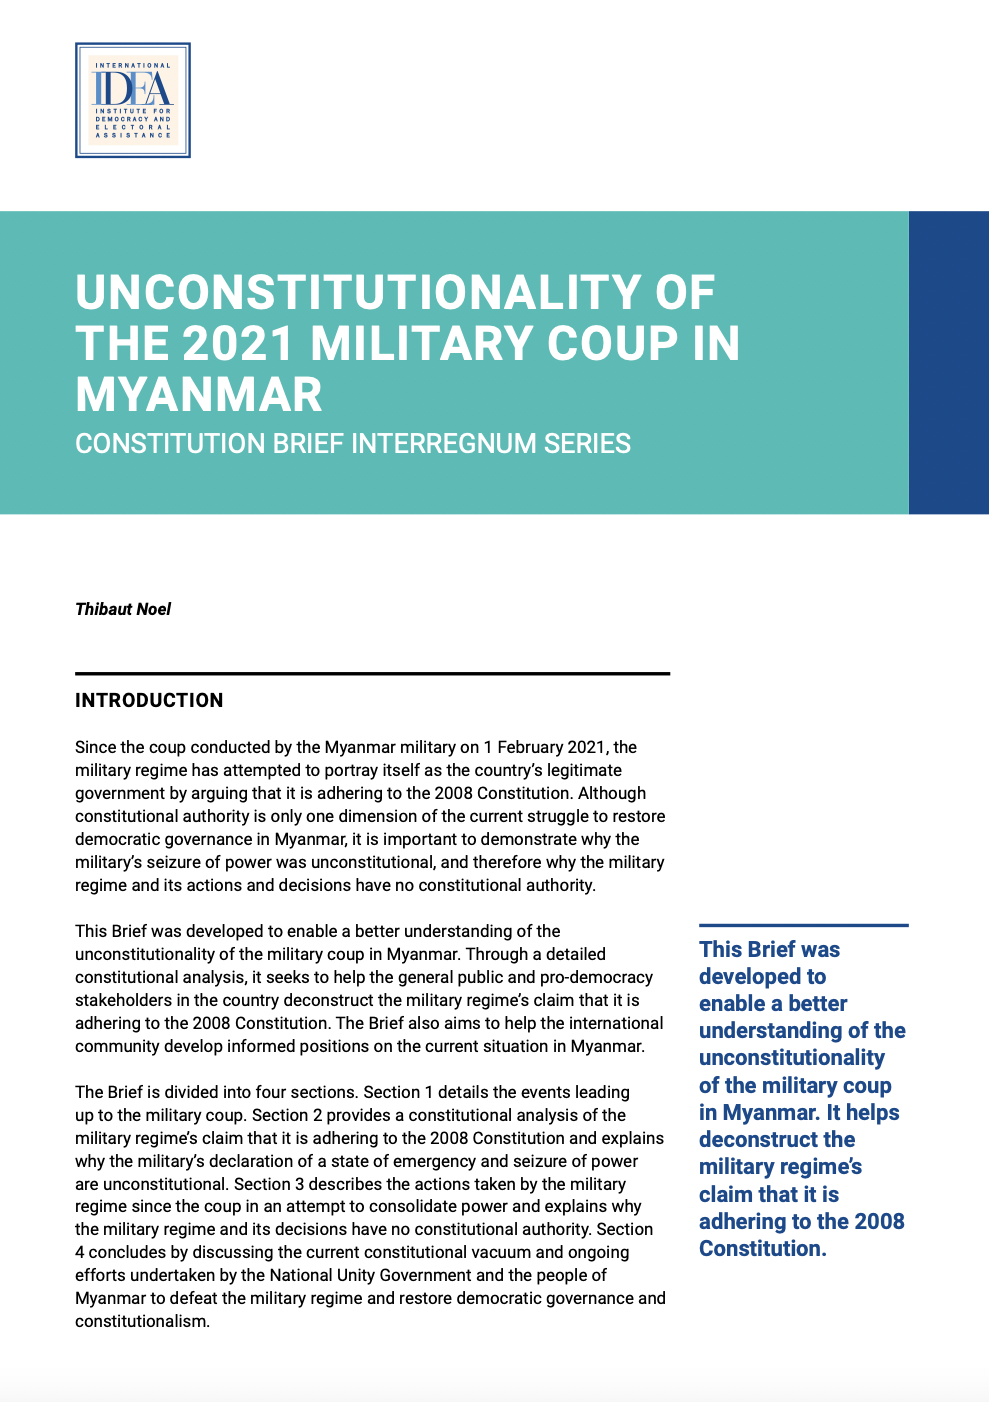 UNCONSTITUTIONALITY OF THE 2021 MILITARY COUP IN MYANMAR